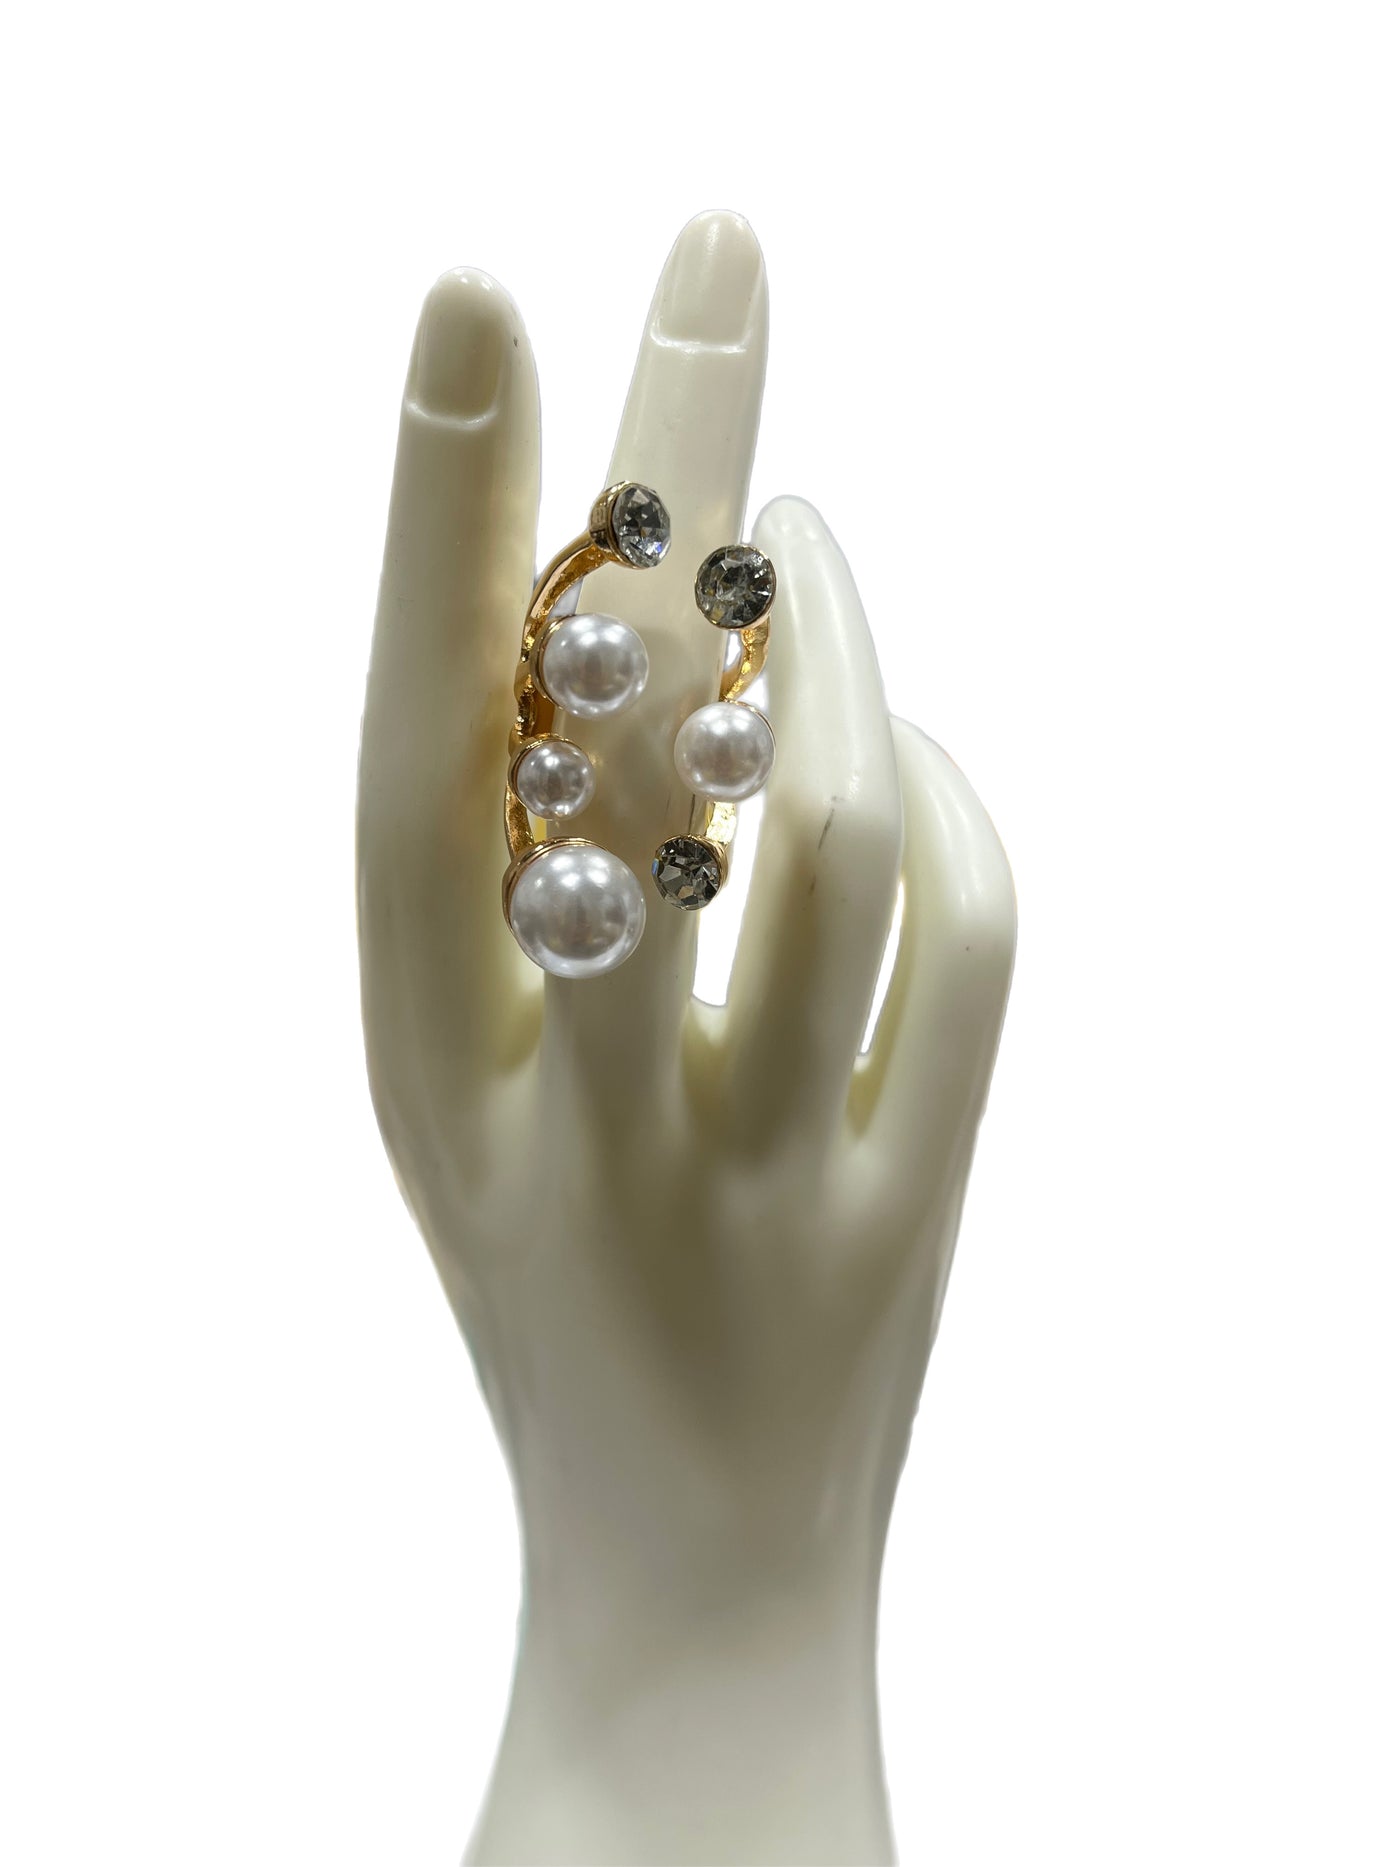 Your Highness Pearl statement ring